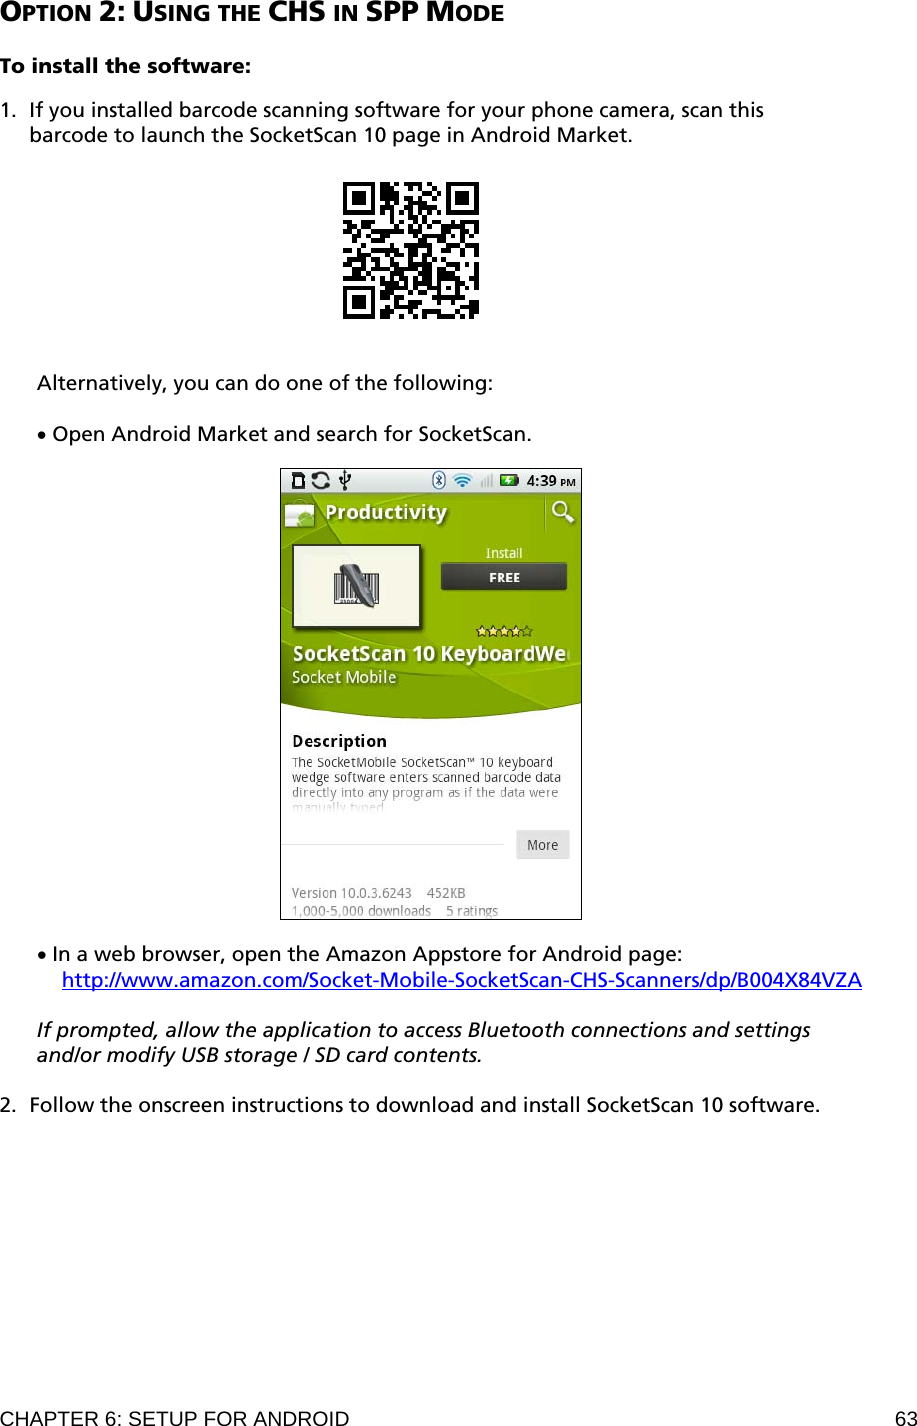 CHAPTER 6: SETUP FOR ANDROID  63 OPTION 2: USING THE CHS IN SPP MODE  To install the software:  1. If you installed barcode scanning software for your phone camera, scan this barcode to launch the SocketScan 10 page in Android Market.     Alternatively, you can do one of the following:  • Open Android Market and search for SocketScan.    • In a web browser, open the Amazon Appstore for Android page:  http://www.amazon.com/Socket-Mobile-SocketScan-CHS-Scanners/dp/B004X84VZA  If prompted, allow the application to access Bluetooth connections and settings and/or modify USB storage / SD card contents.  2. Follow the onscreen instructions to download and install SocketScan 10 software.  